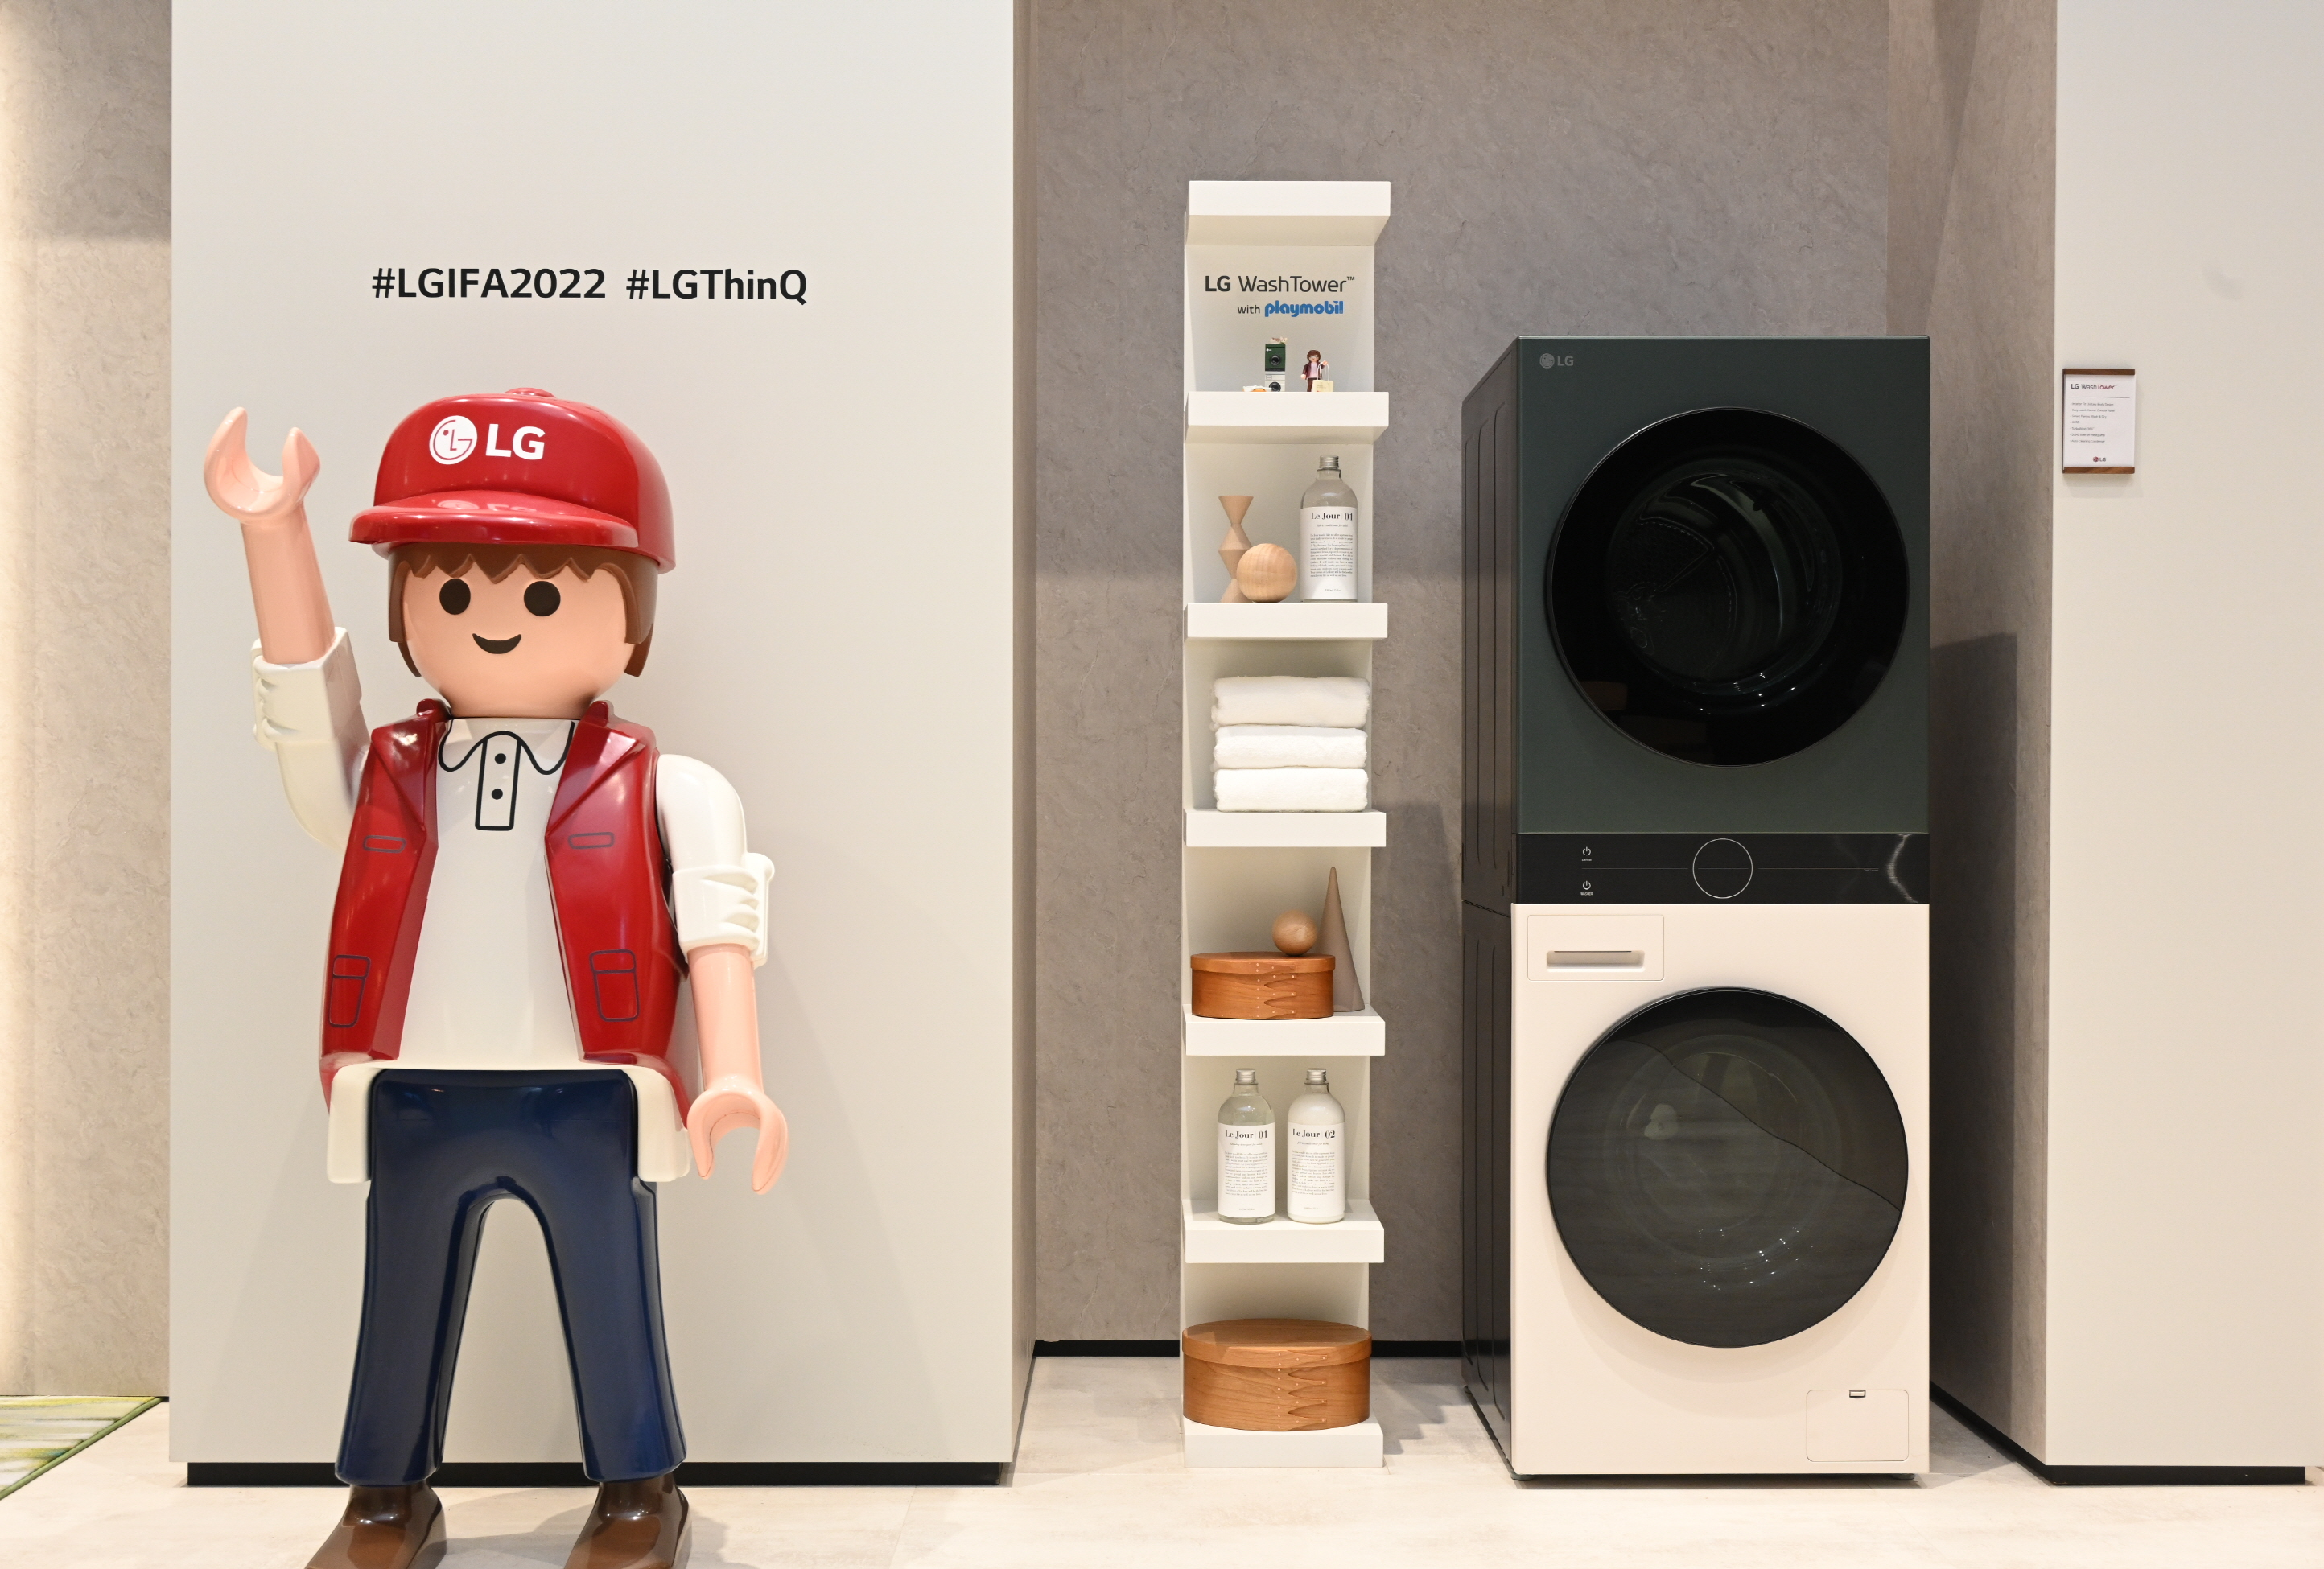 LG collaborated with PLAYMOBIL and presented an exclusive collection of LG-themed toys at IFA 2022